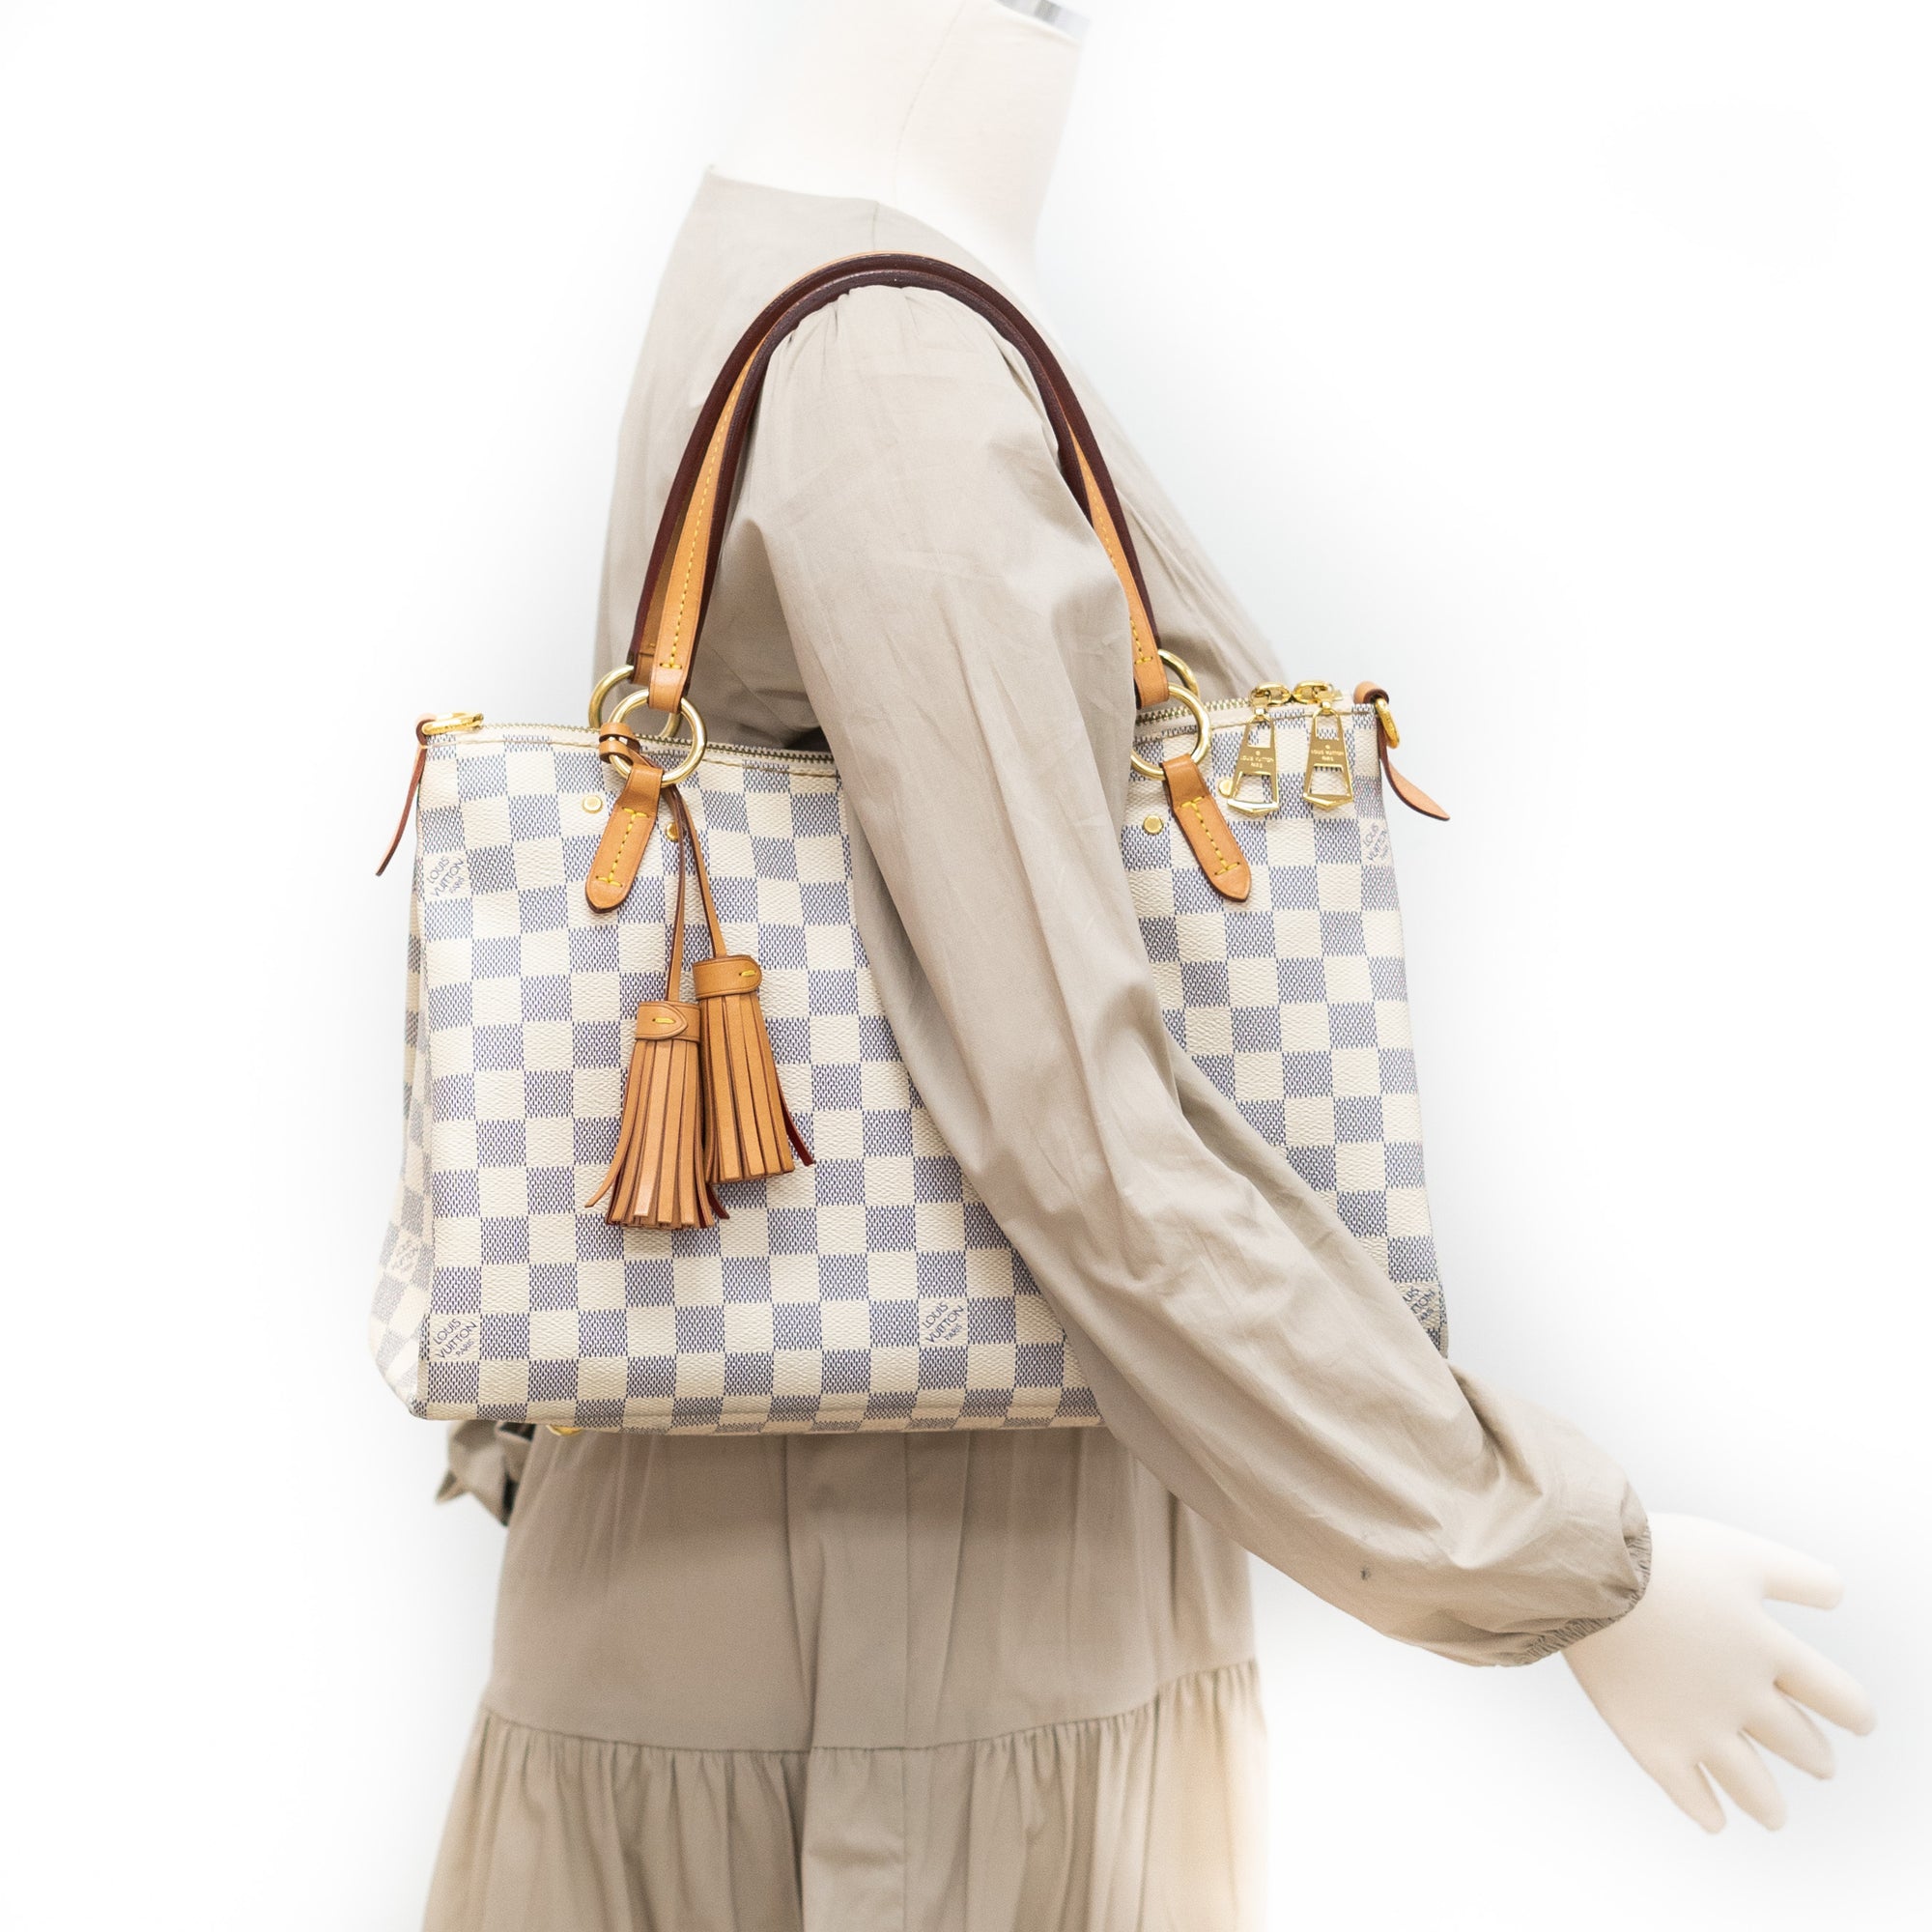 Brand New from Louis Vuitton and Straight to YOU! the Lymington